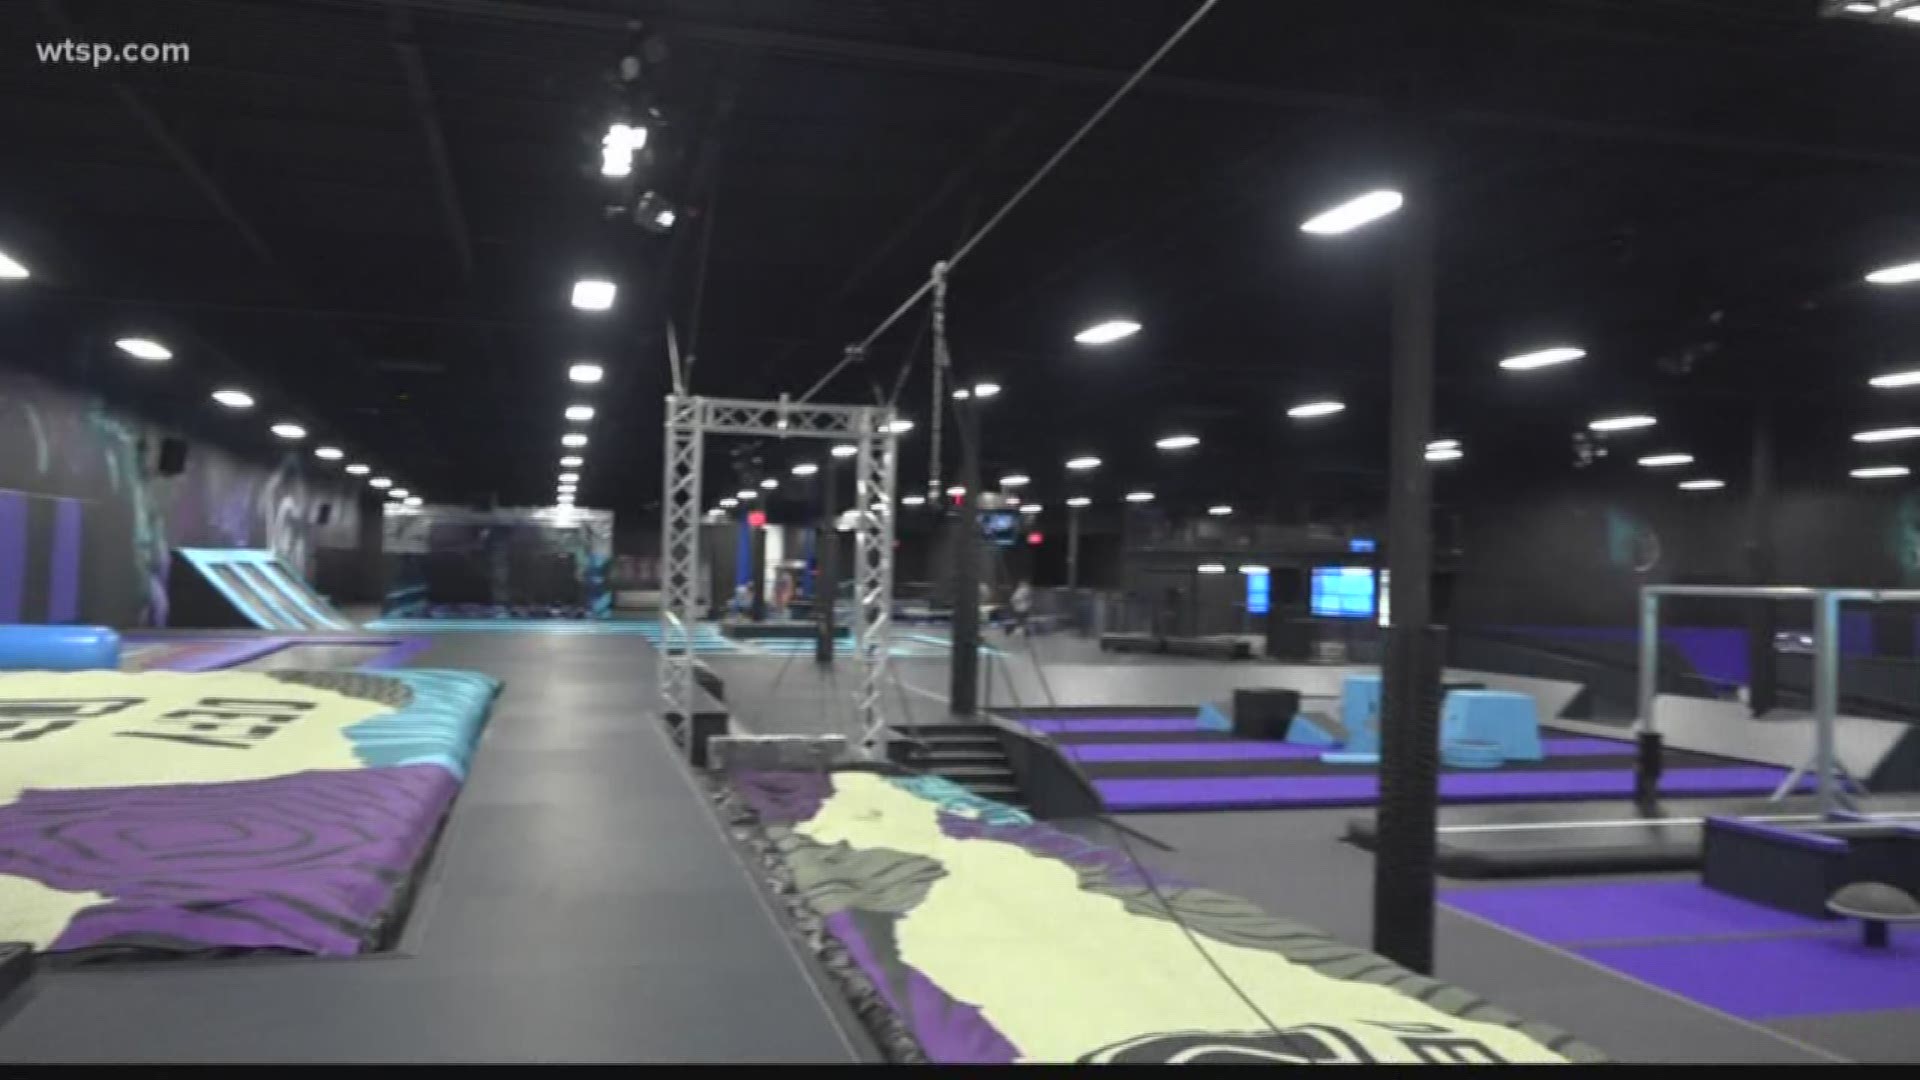 Jabari Thomas takes us to an trampoline park where you can burn off some energy!